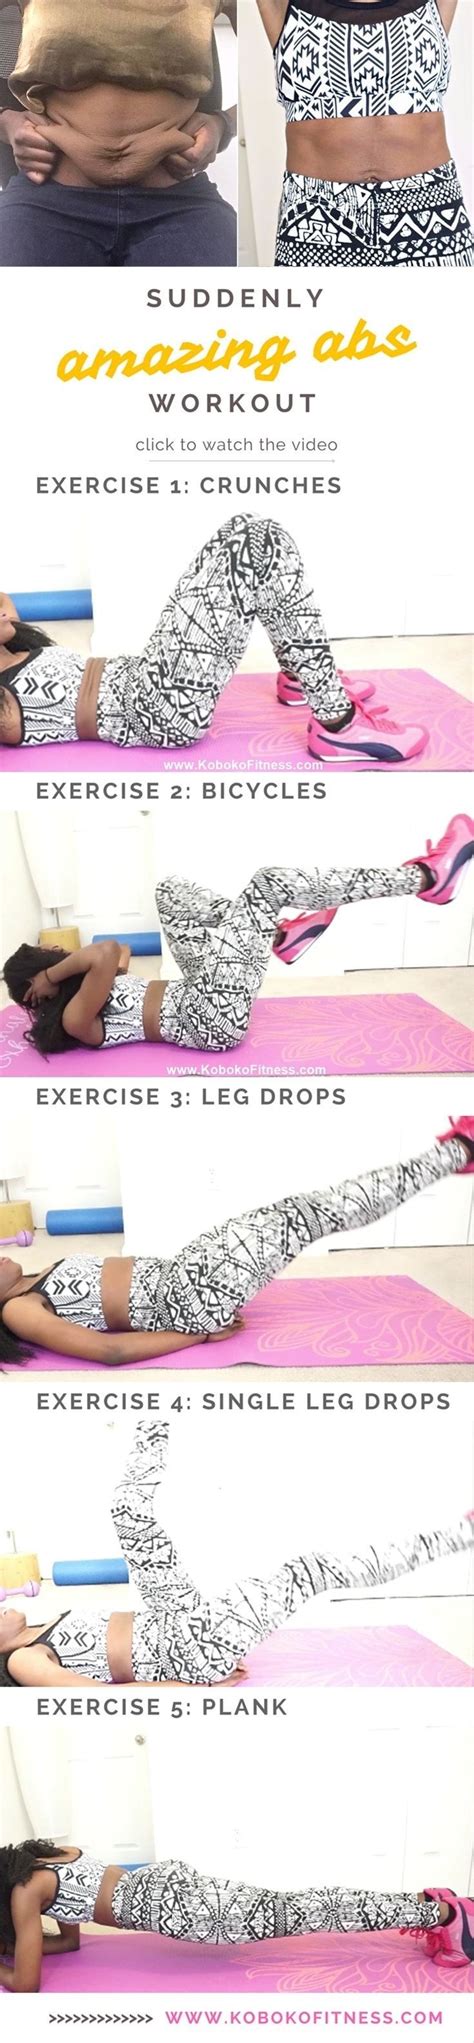 10 Minute Flat Stomach And Abs Workout At Home Full Video Koboko